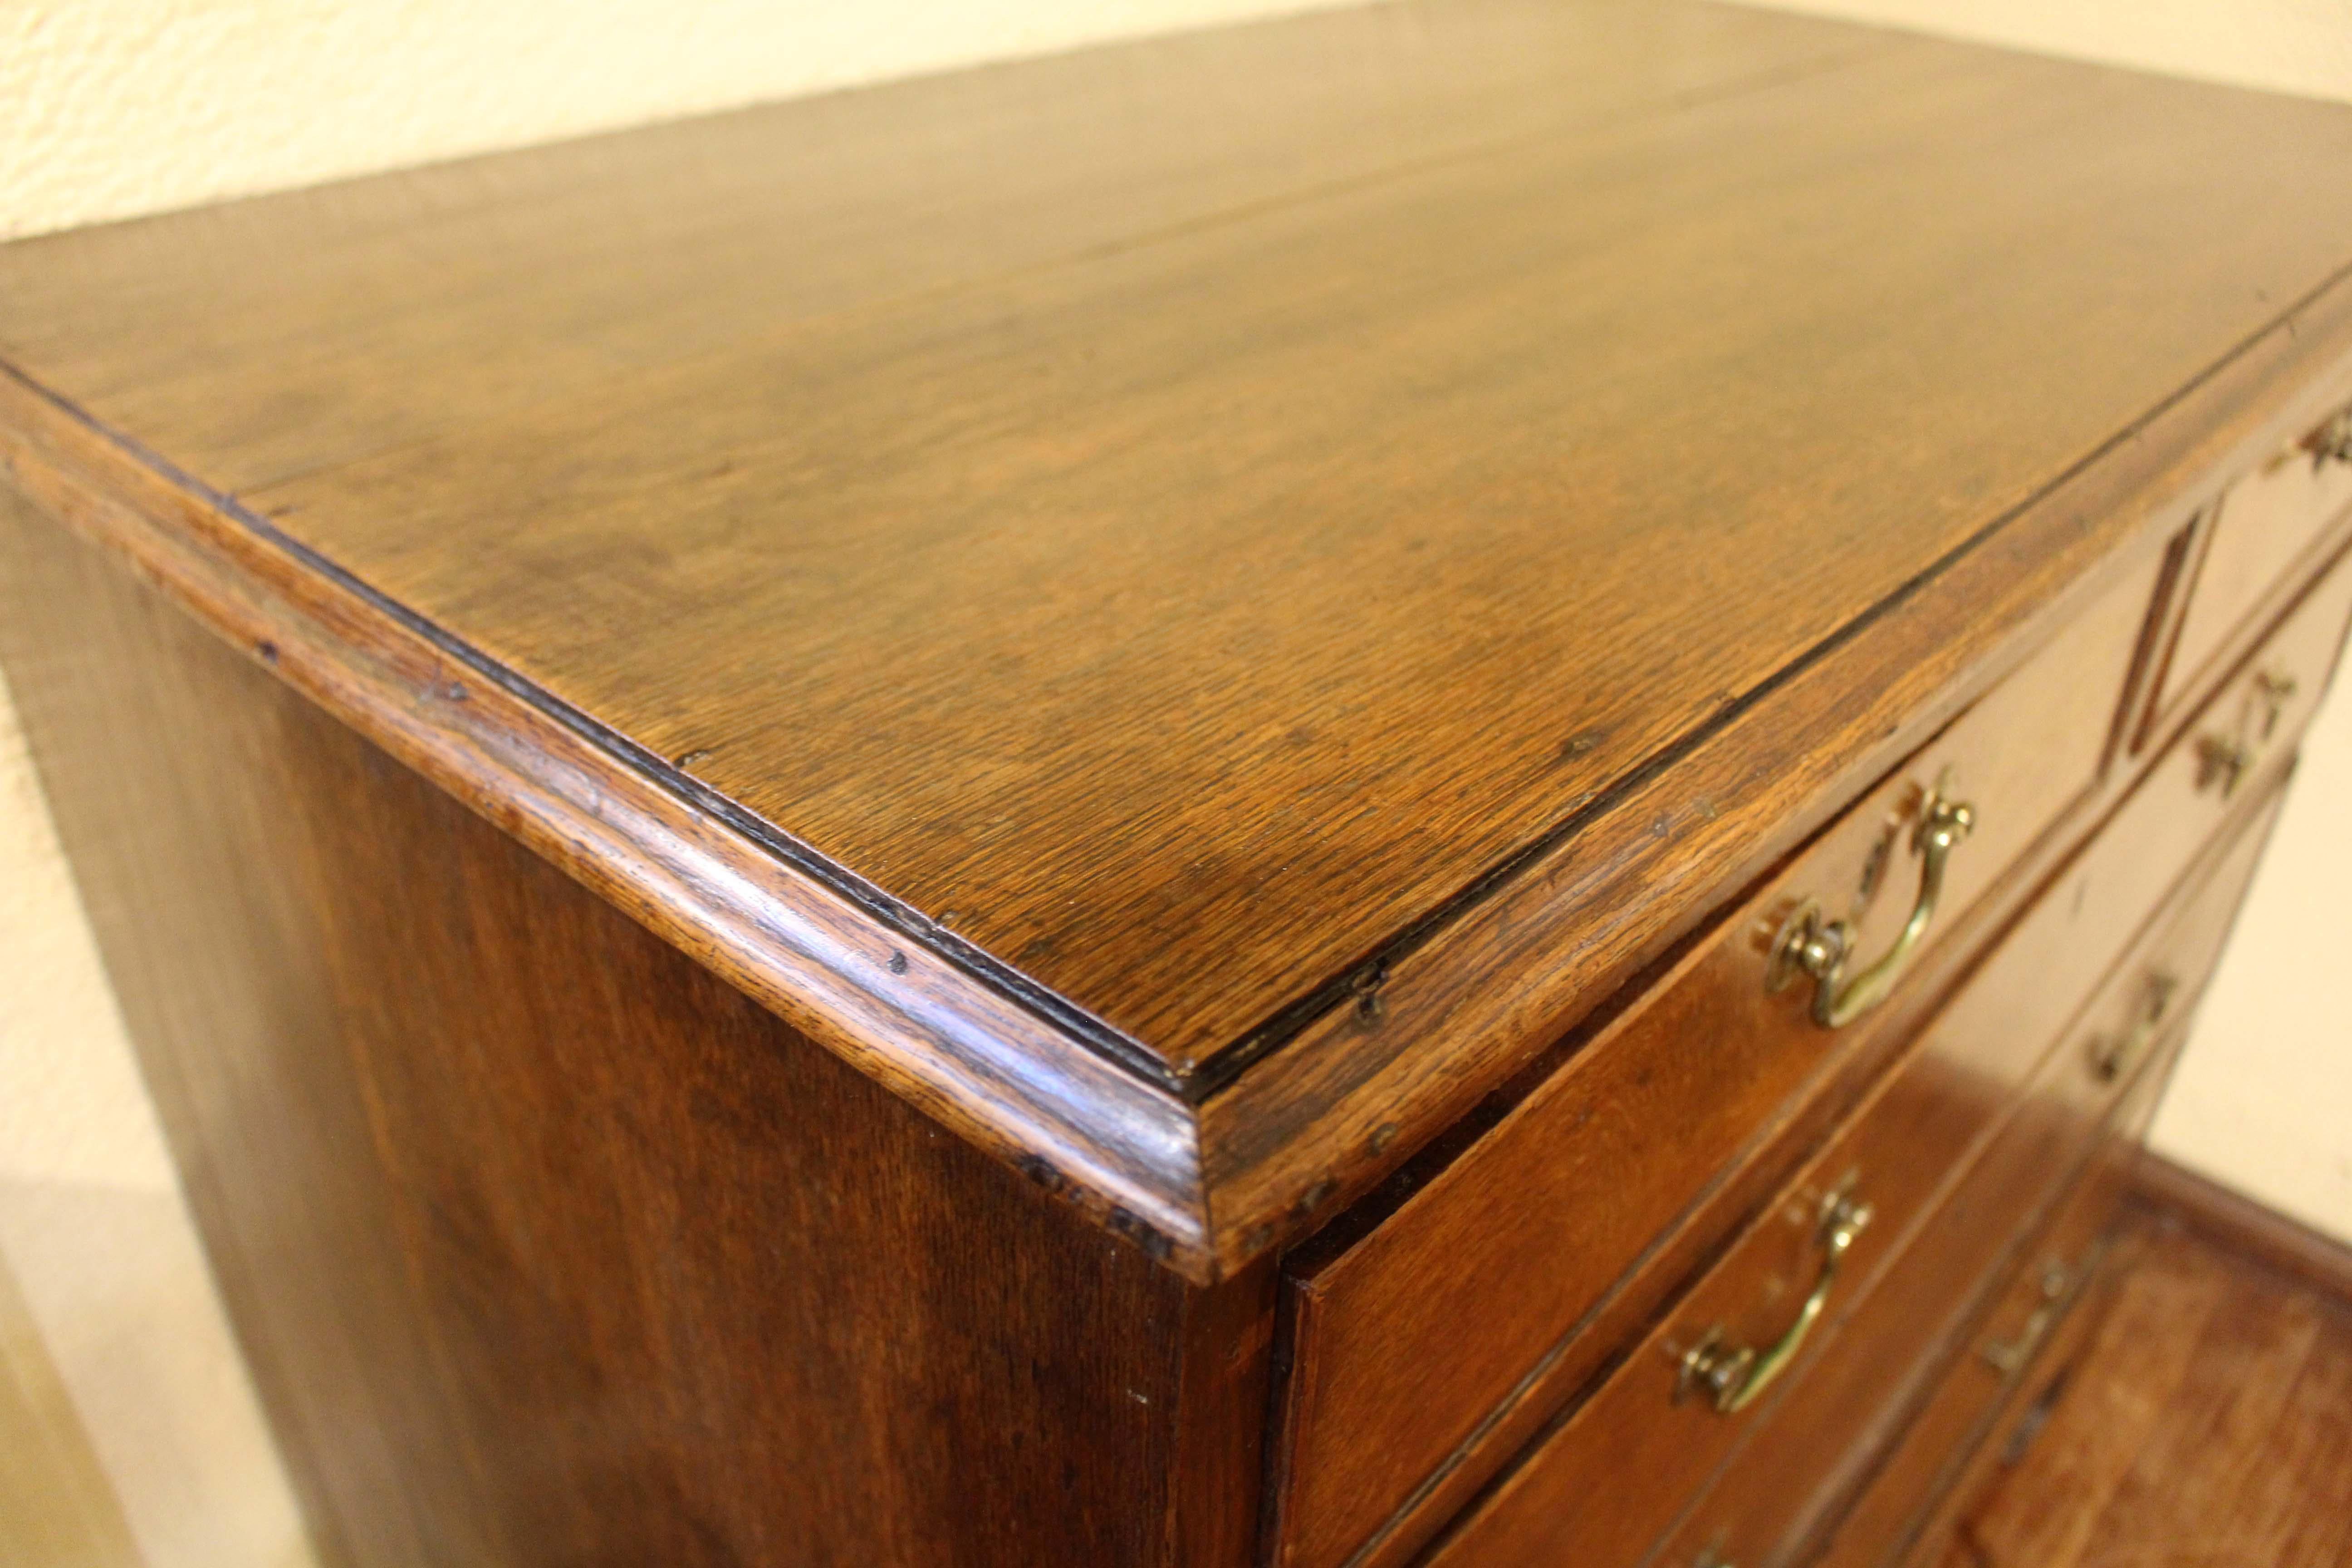 George III chest of drawers, oak, 2 over 3 drawer form. English, c.1760. Thumb molded top. Raised on well shaped bracket feet. Original bail & rosette pulls. A fine example of Georgian country house furniture.

We are a family business that has